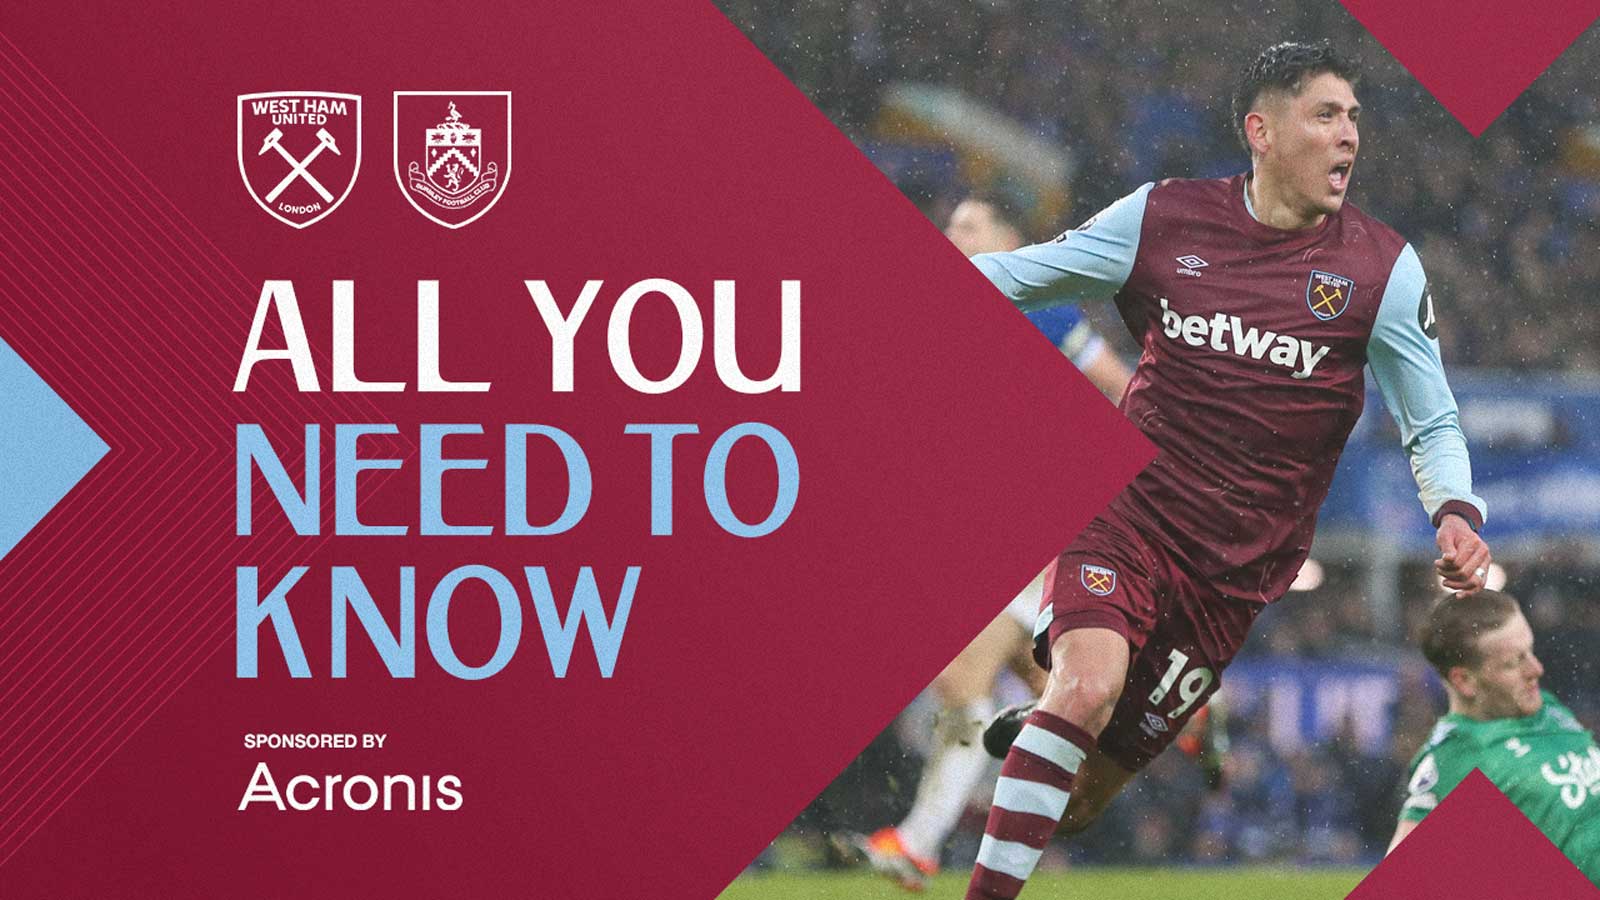 West Ham United v Burnley, All You Need To Know